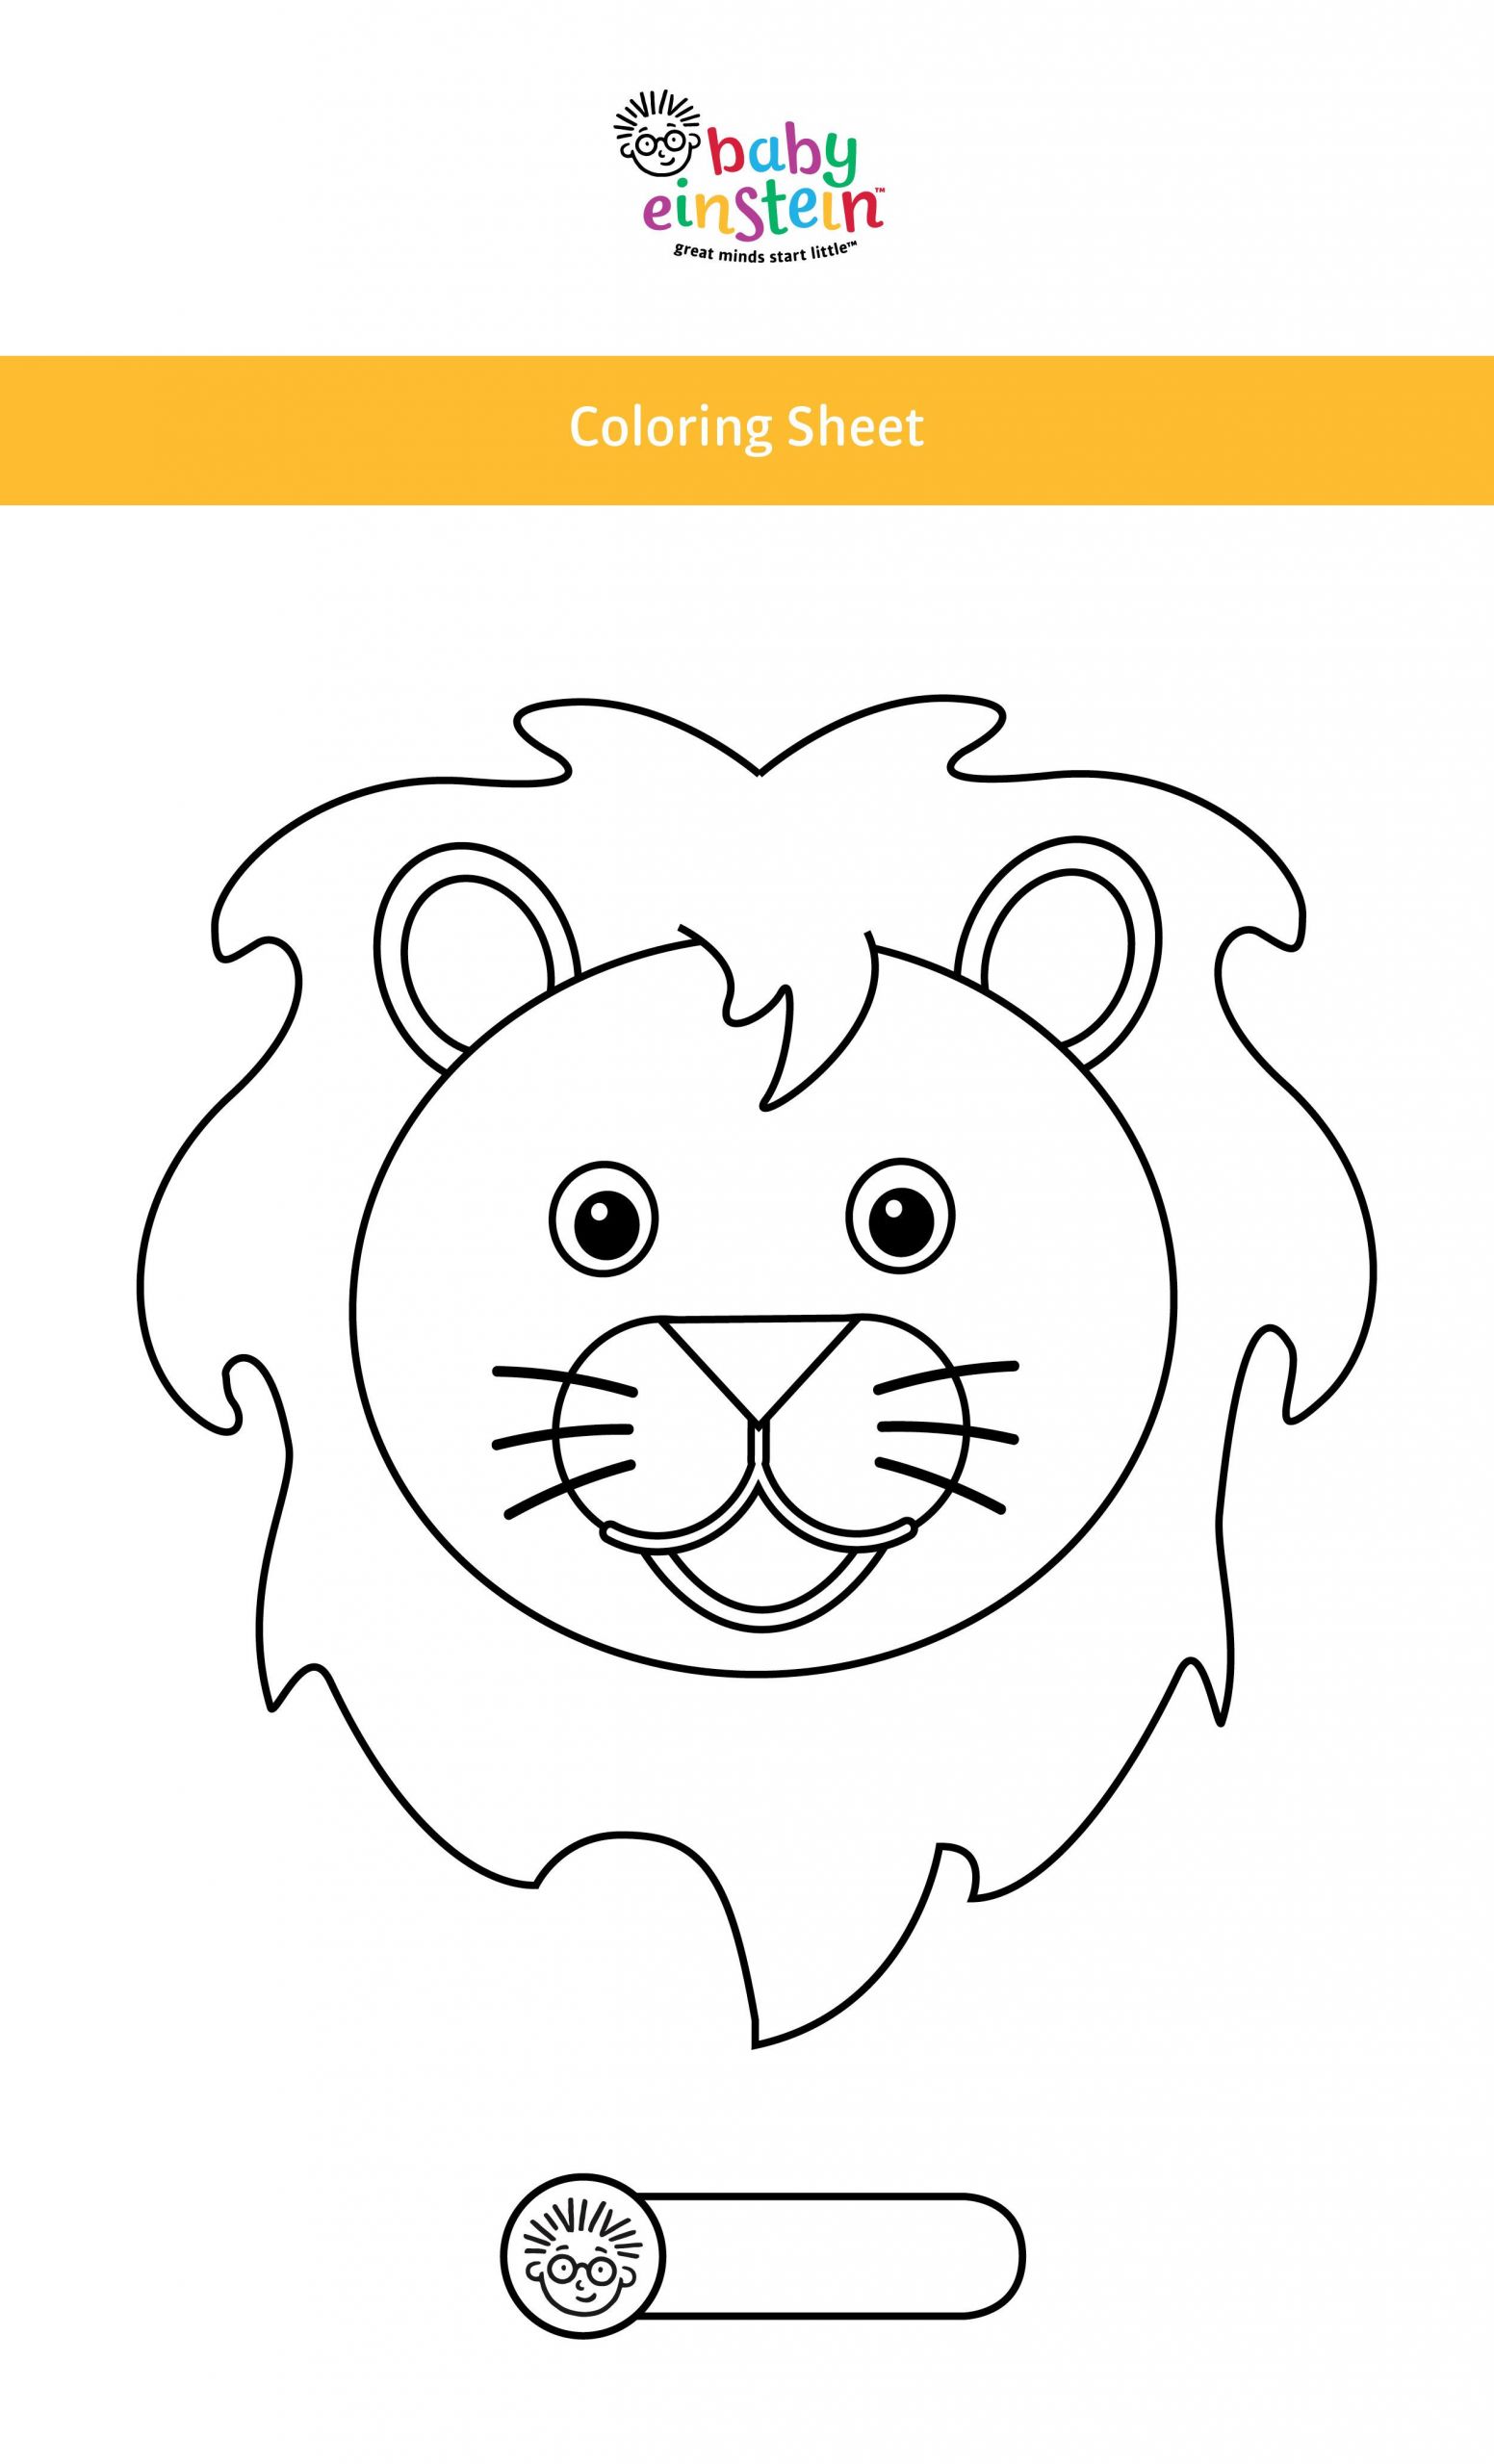 Baby Einstein Coloring Books
 Adorable Baby Einstein coloring pages for your little one